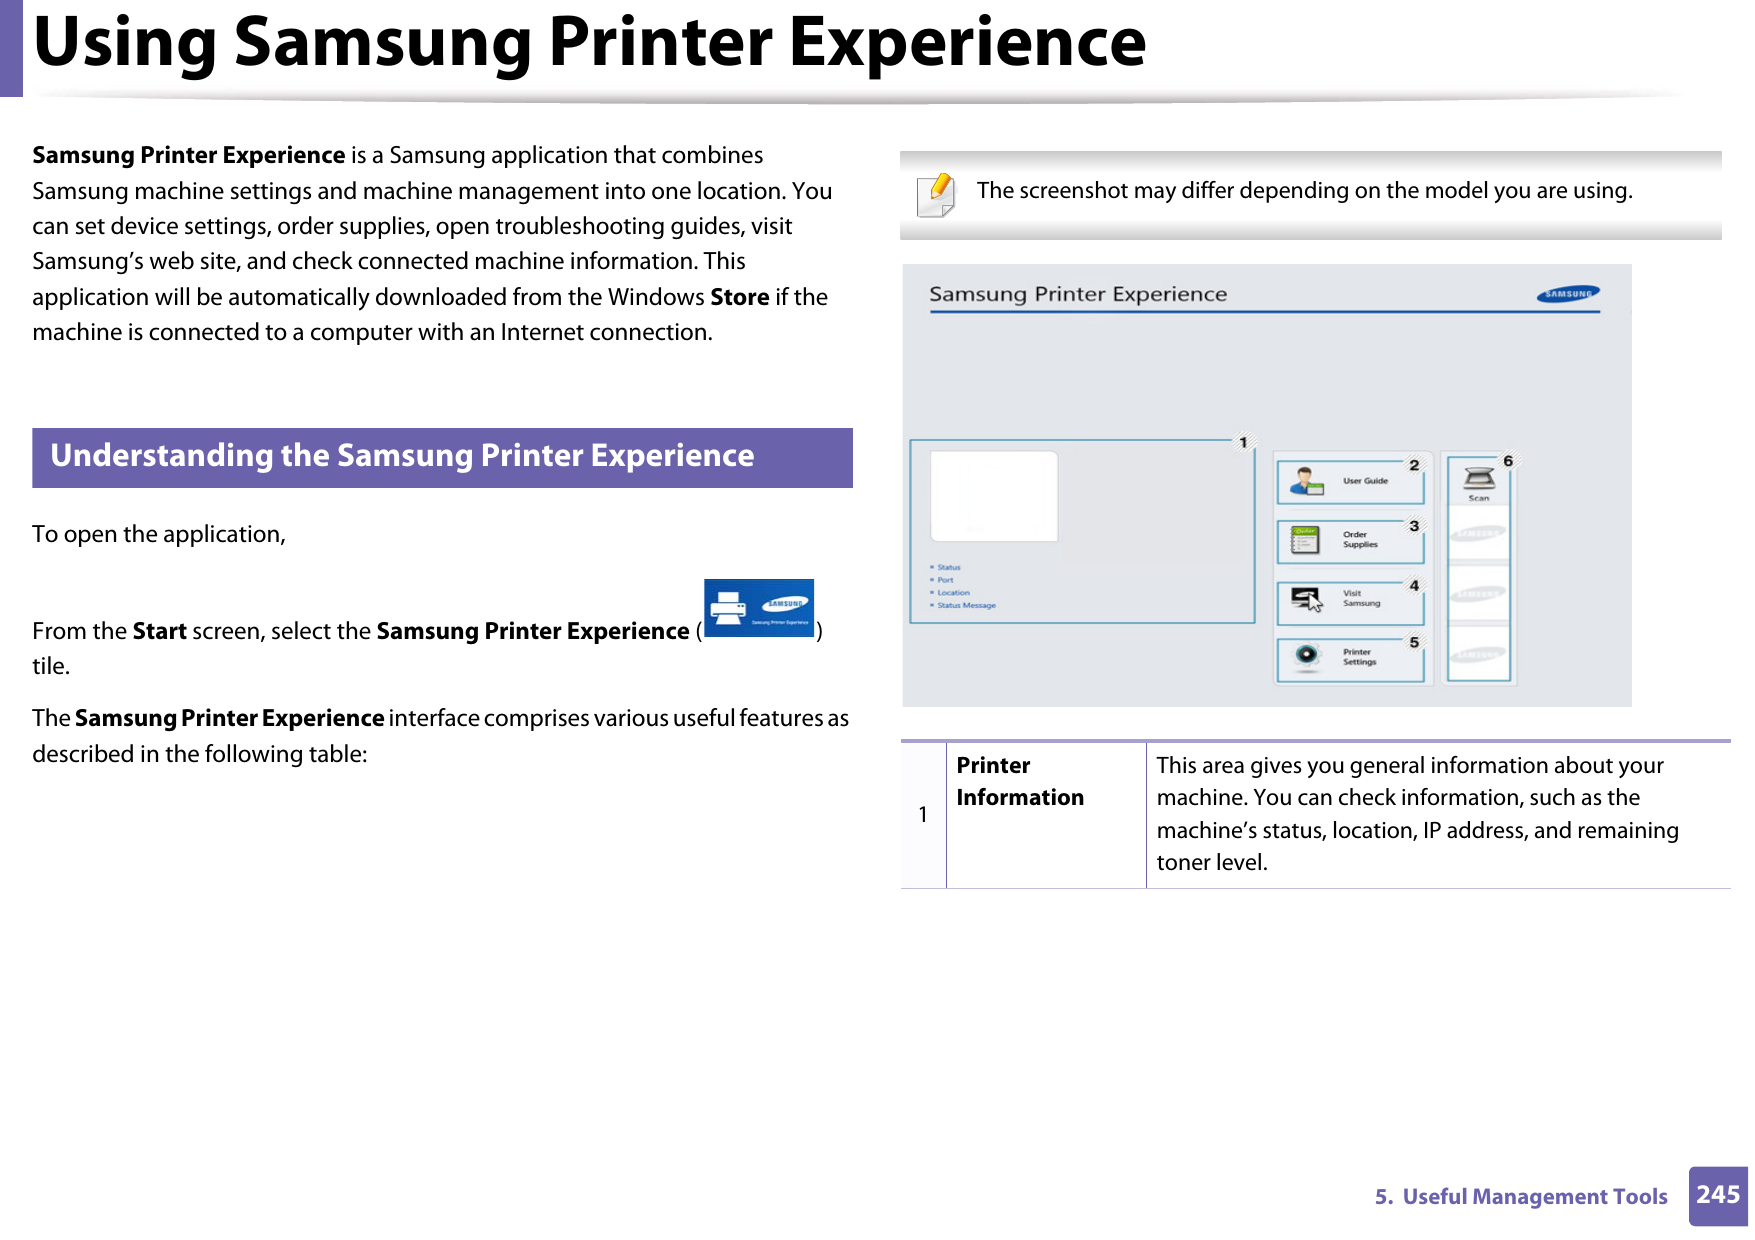 2455.  Useful Management ToolsUsing Samsung Printer Experience Samsung Printer Experience is a Samsung application that combines Samsung machine settings and machine management into one location. You can set device settings, order supplies, open troubleshooting guides, visit Samsung’s web site, and check connected machine information. This application will be automatically downloaded from the Windows Store if the machine is connected to a computer with an Internet connection. 8 Understanding the Samsung Printer ExperienceTo open the application, From the Start screen, select the Samsung Printer Experience () tile. The Samsung Printer Experience interface comprises various useful features as described in the following table: The screenshot may differ depending on the model you are using. 1Printer InformationThis area gives you general information about your machine. You can check information, such as the machine’s status, location, IP address, and remaining toner level.